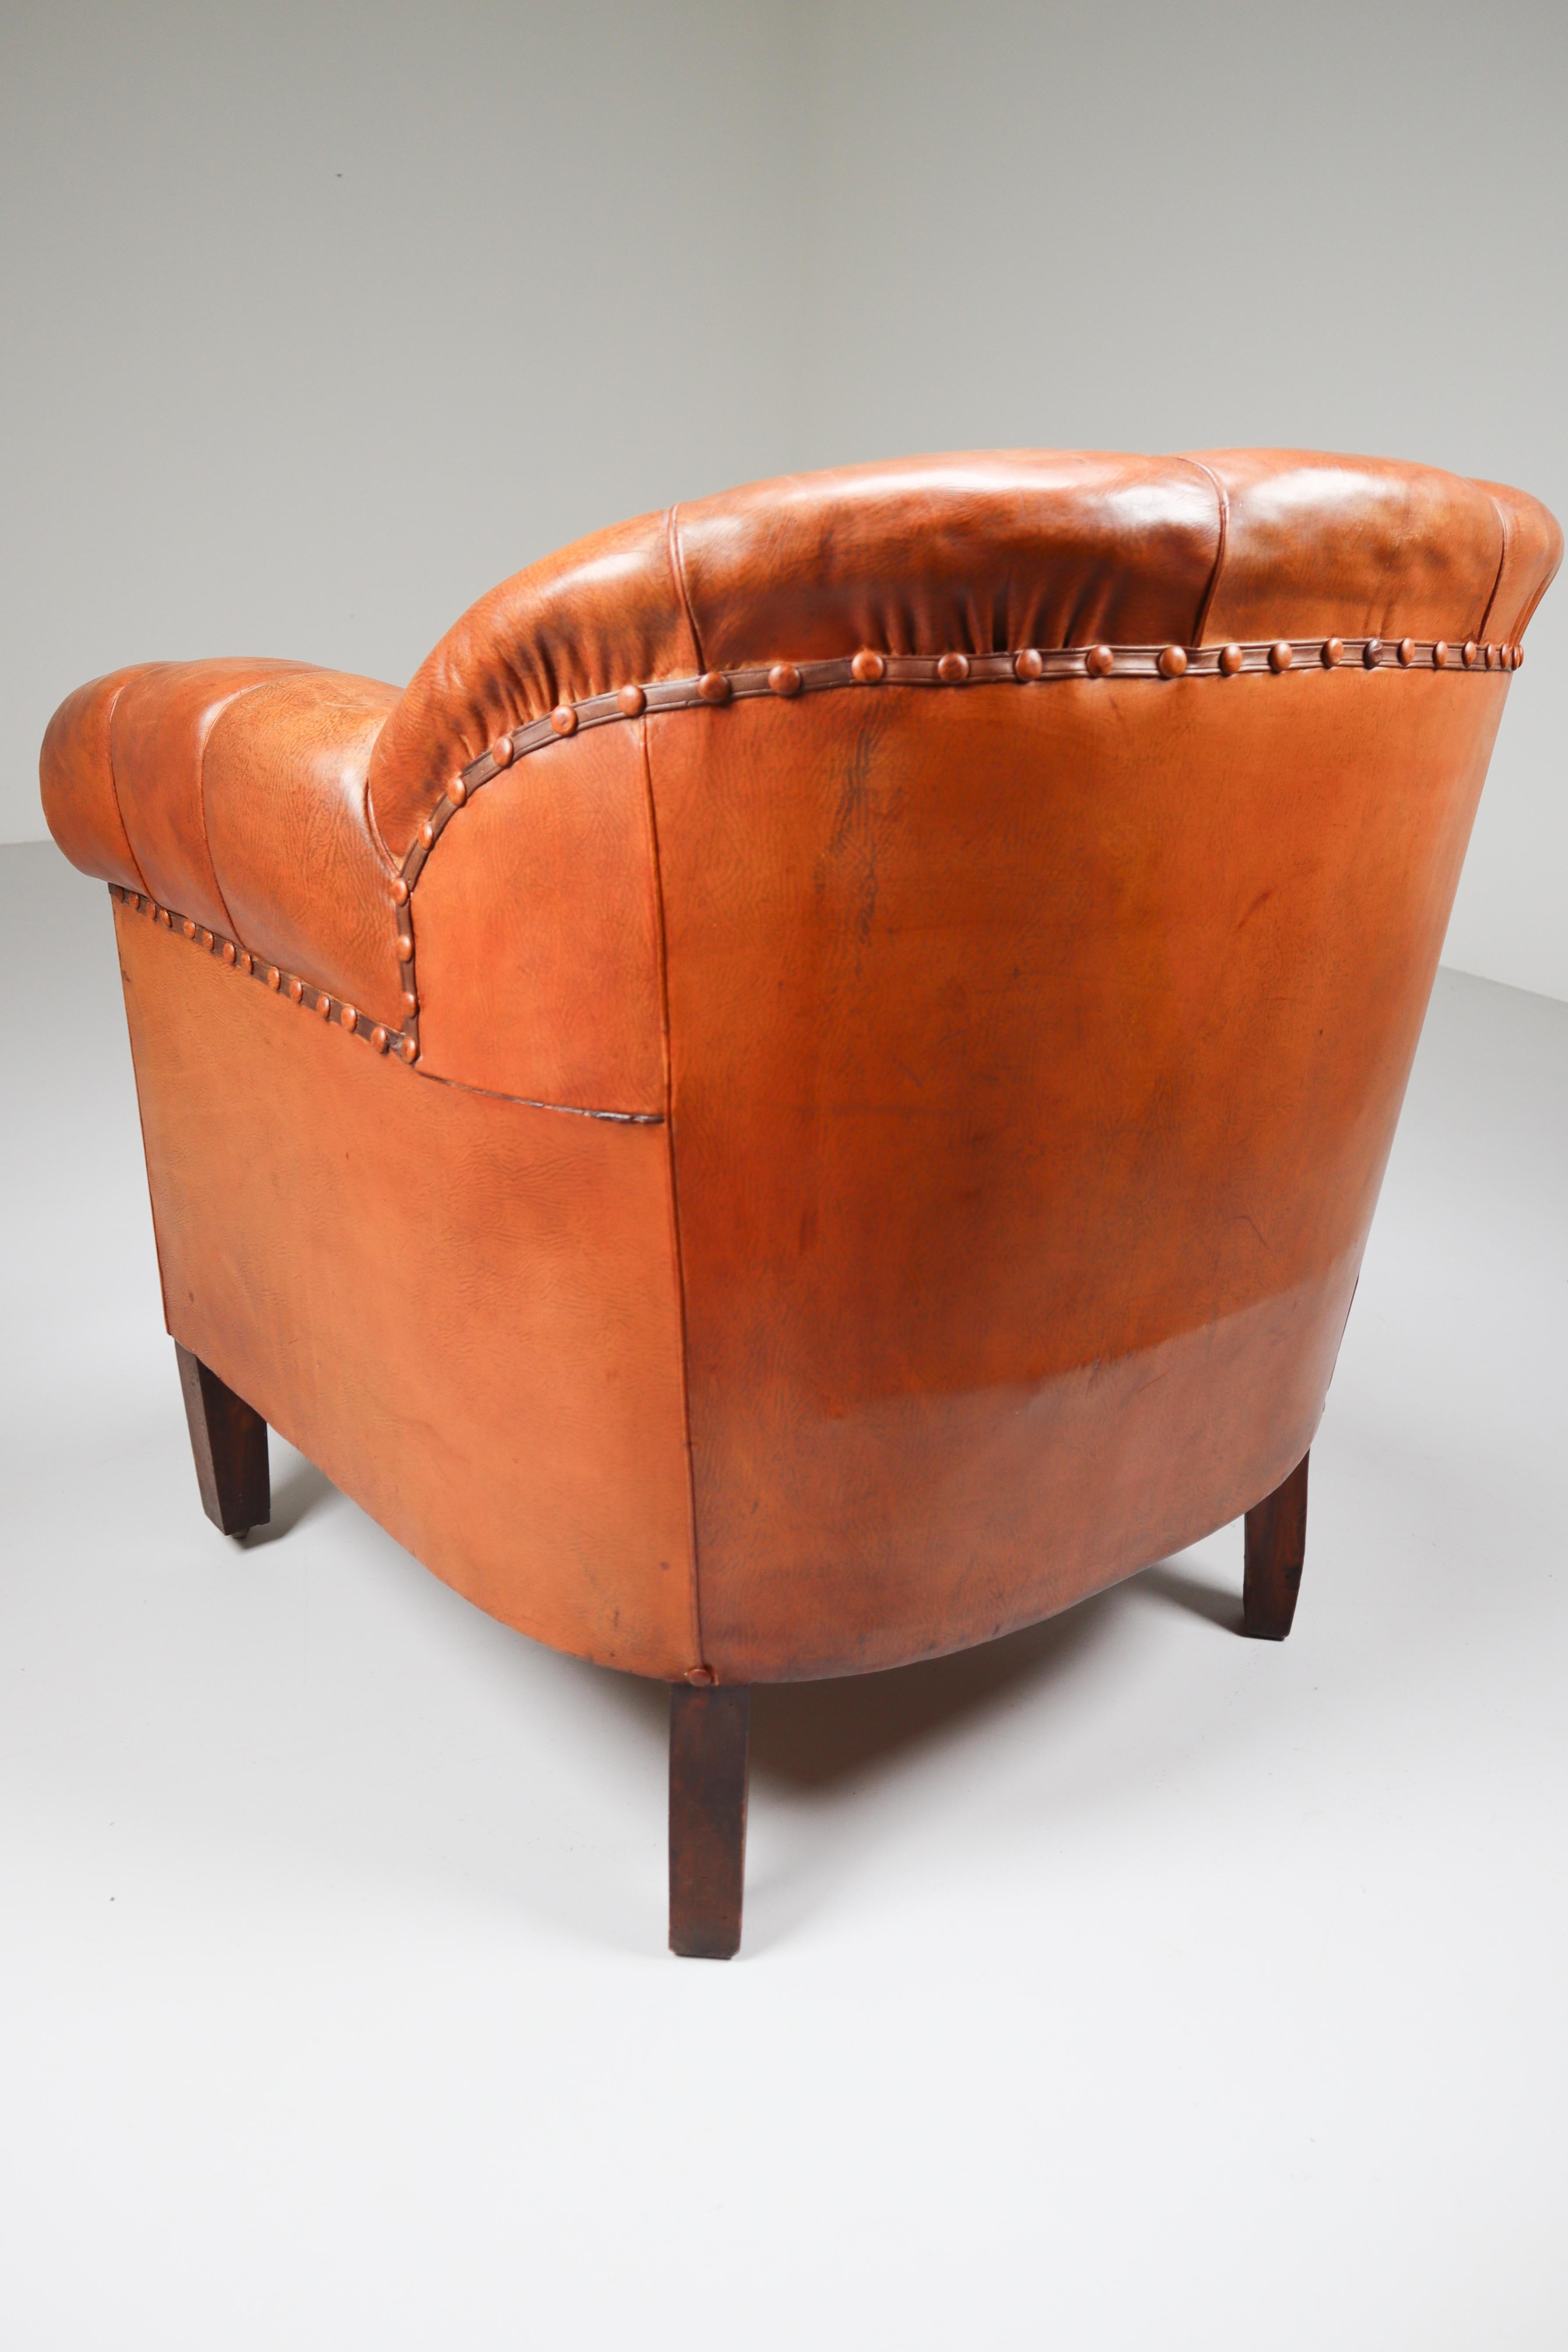 Art Deco Club Chair in Patinated Cognac Leather, Praque, 1930s 2